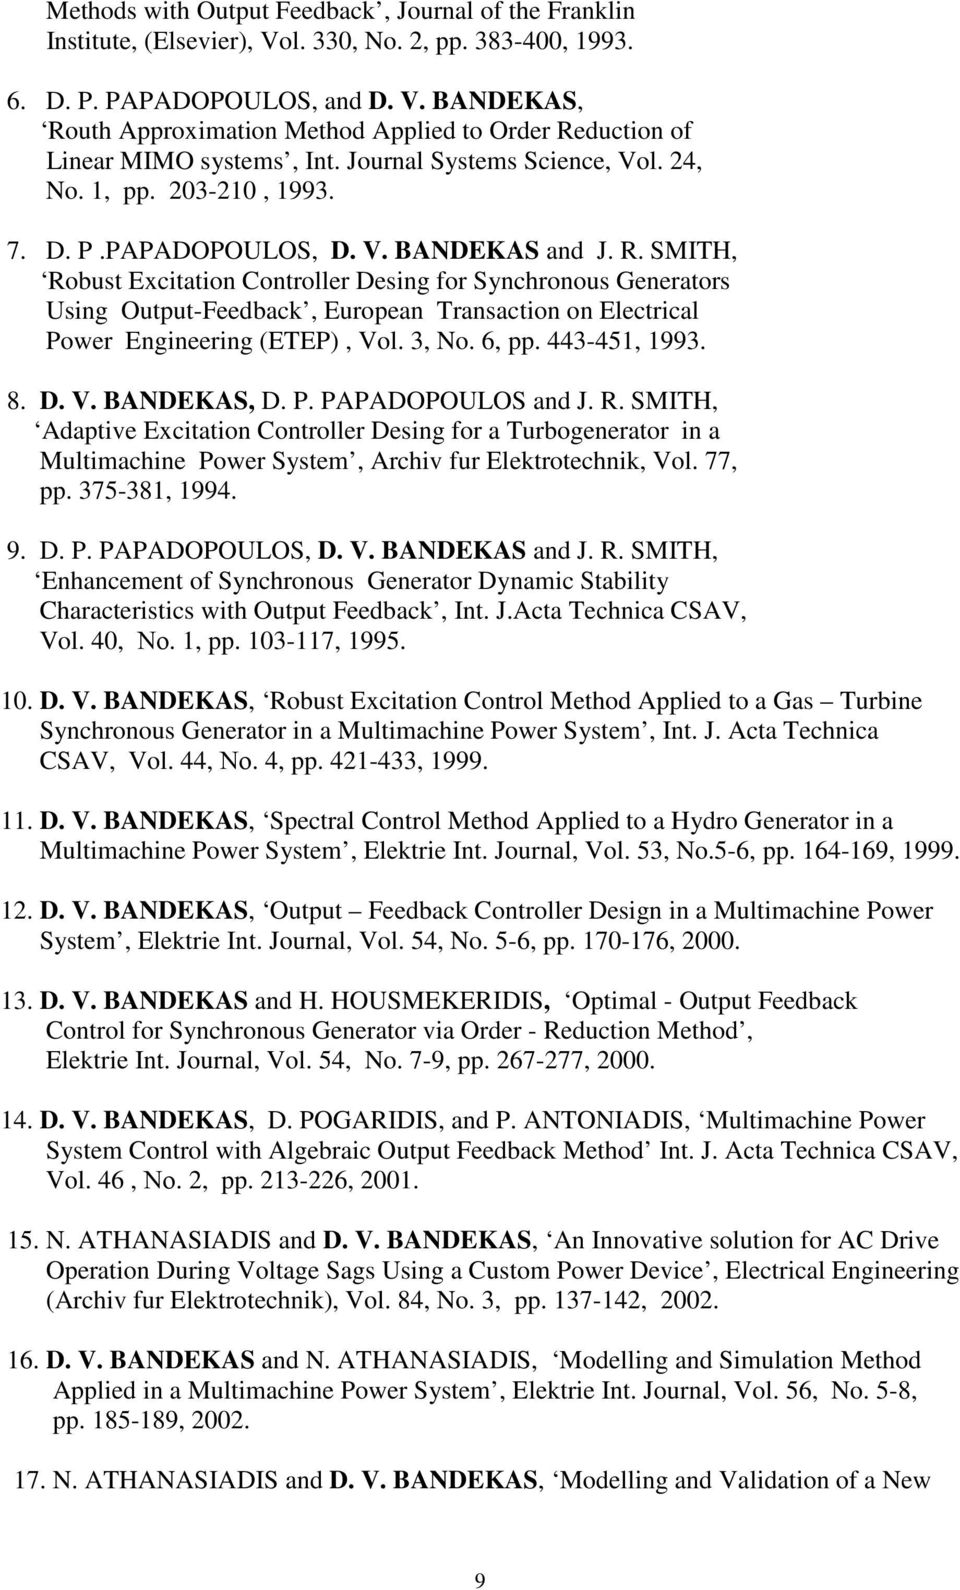 SMITH, Robust Excitation Controller Desing for Synchronous Generators Using Output-Feedback, European Transaction on Electrical Power Engineering (ETEP), Vol. 3, No. 6, pp. 443-451, 1993. 8. D. V. BANDEKAS, D.